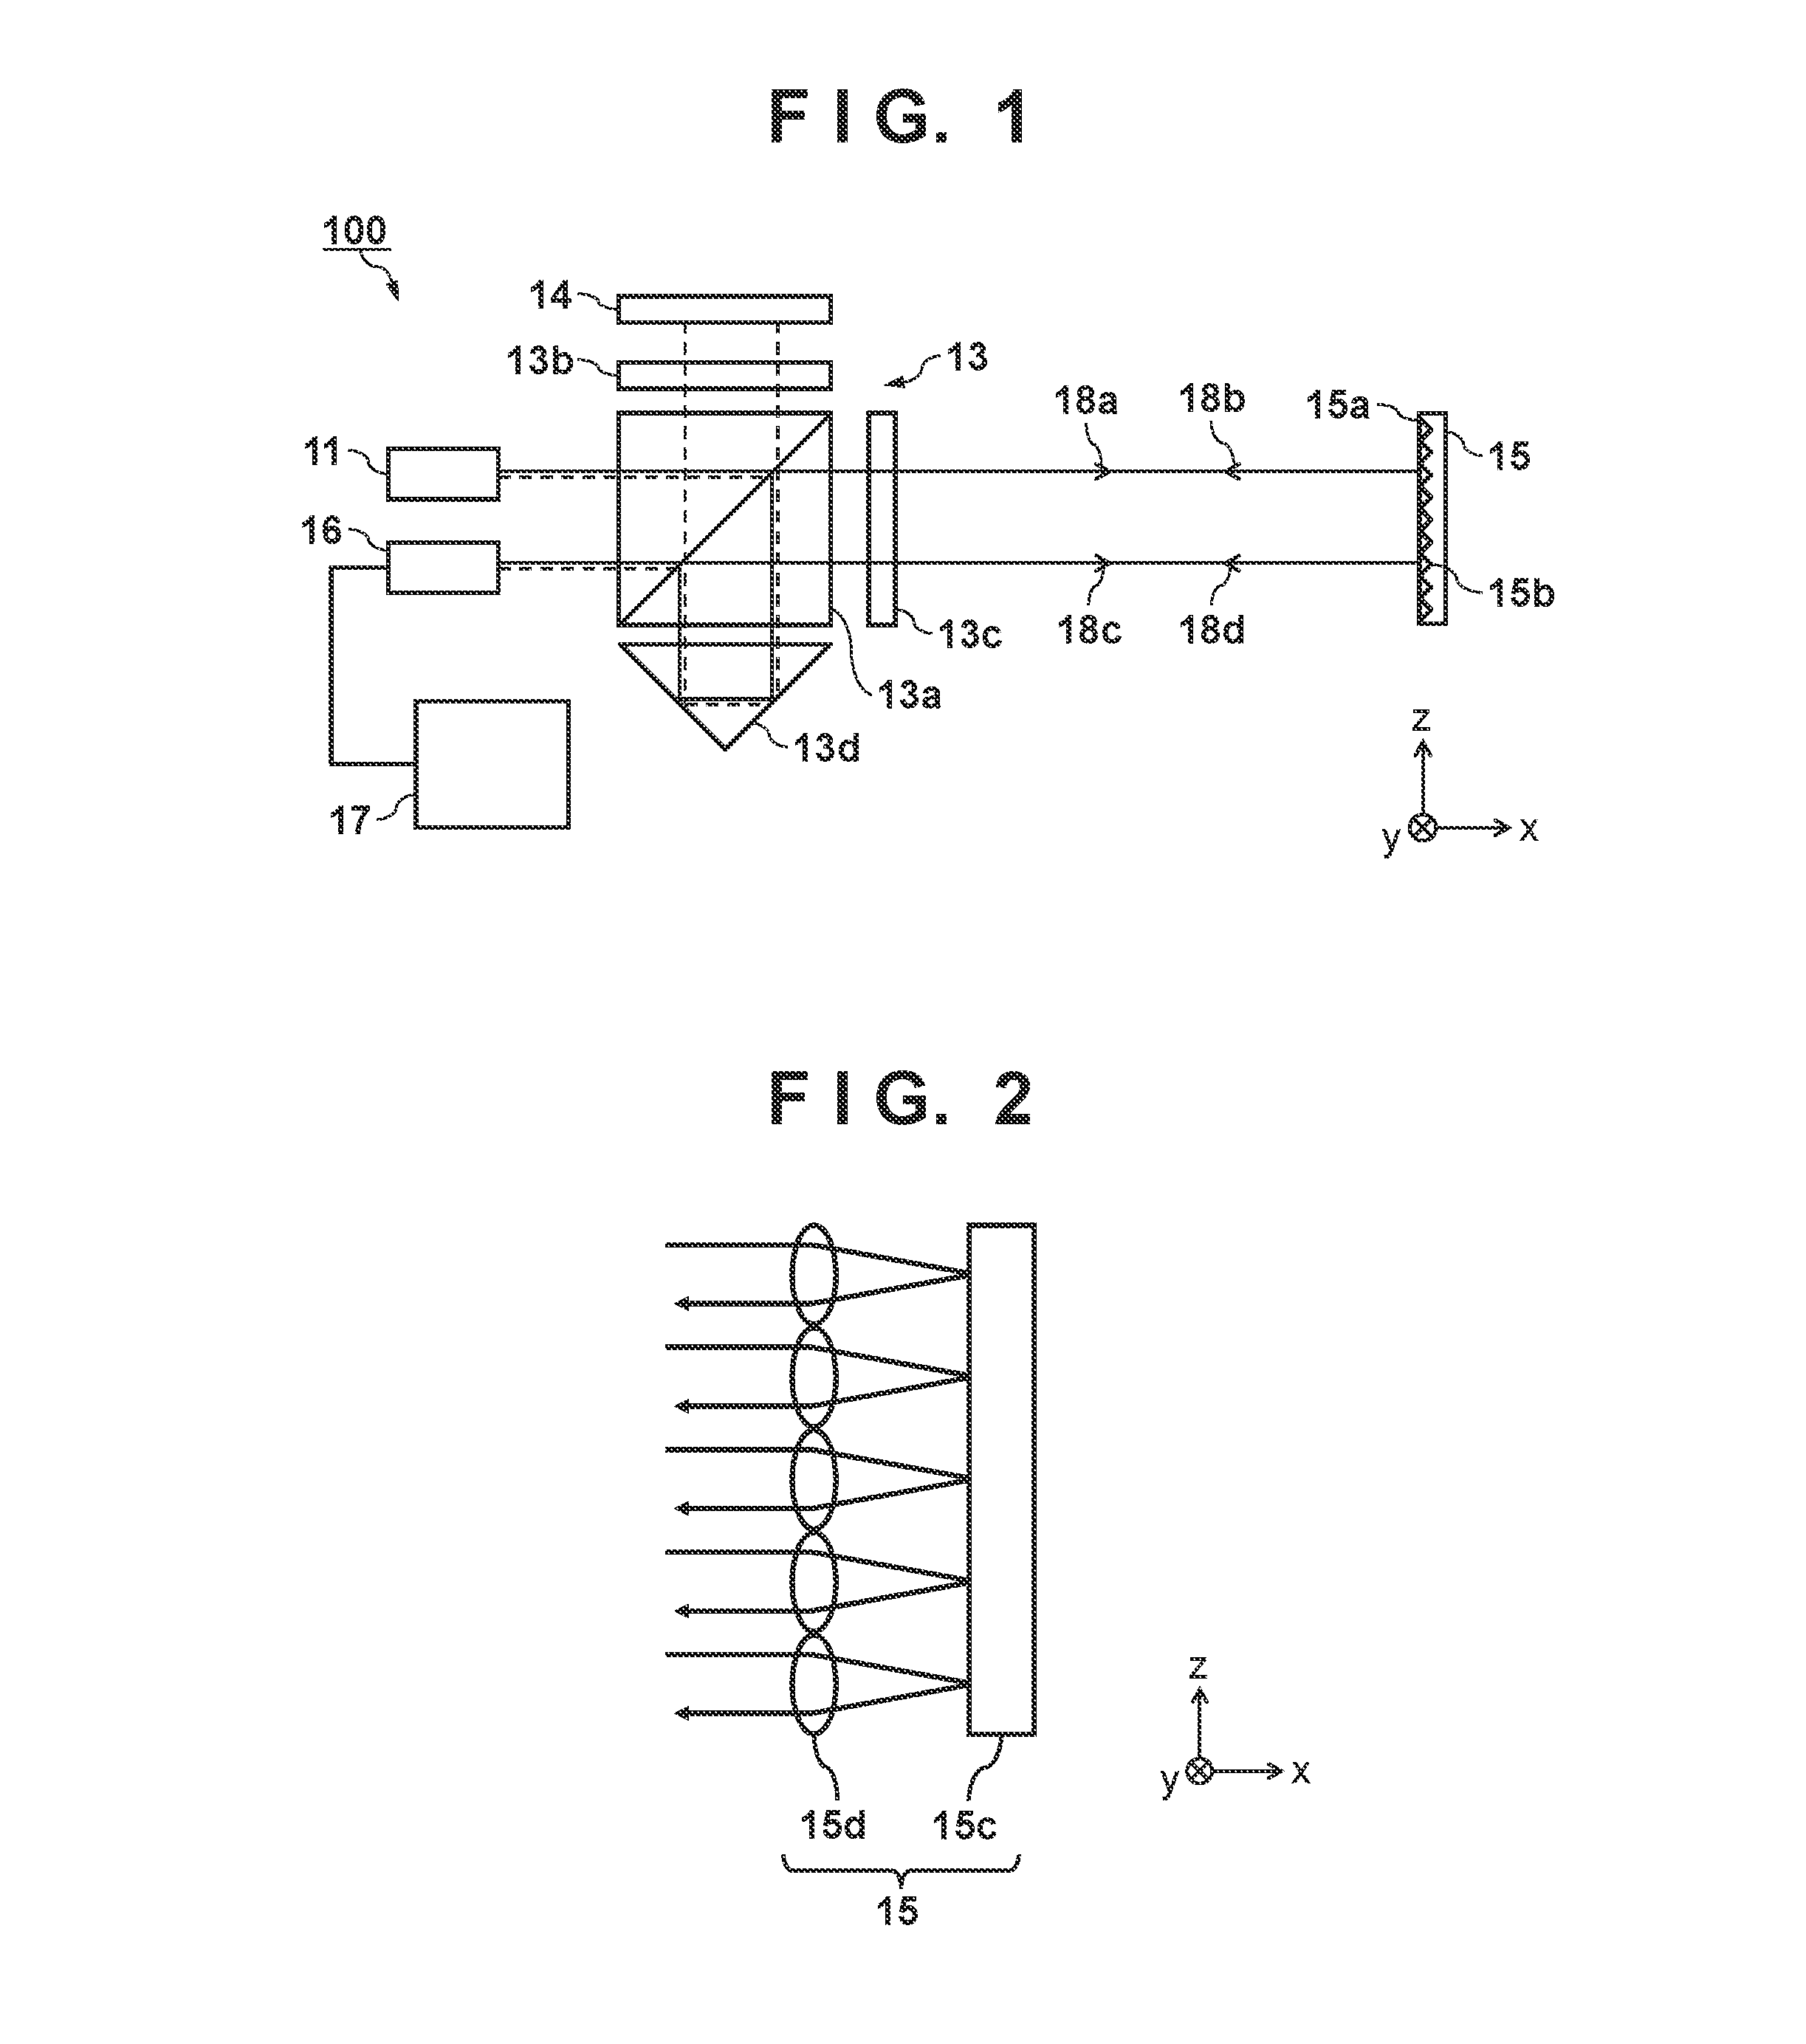 Measurement apparatus, lithography apparatus, and method of manufacturing article